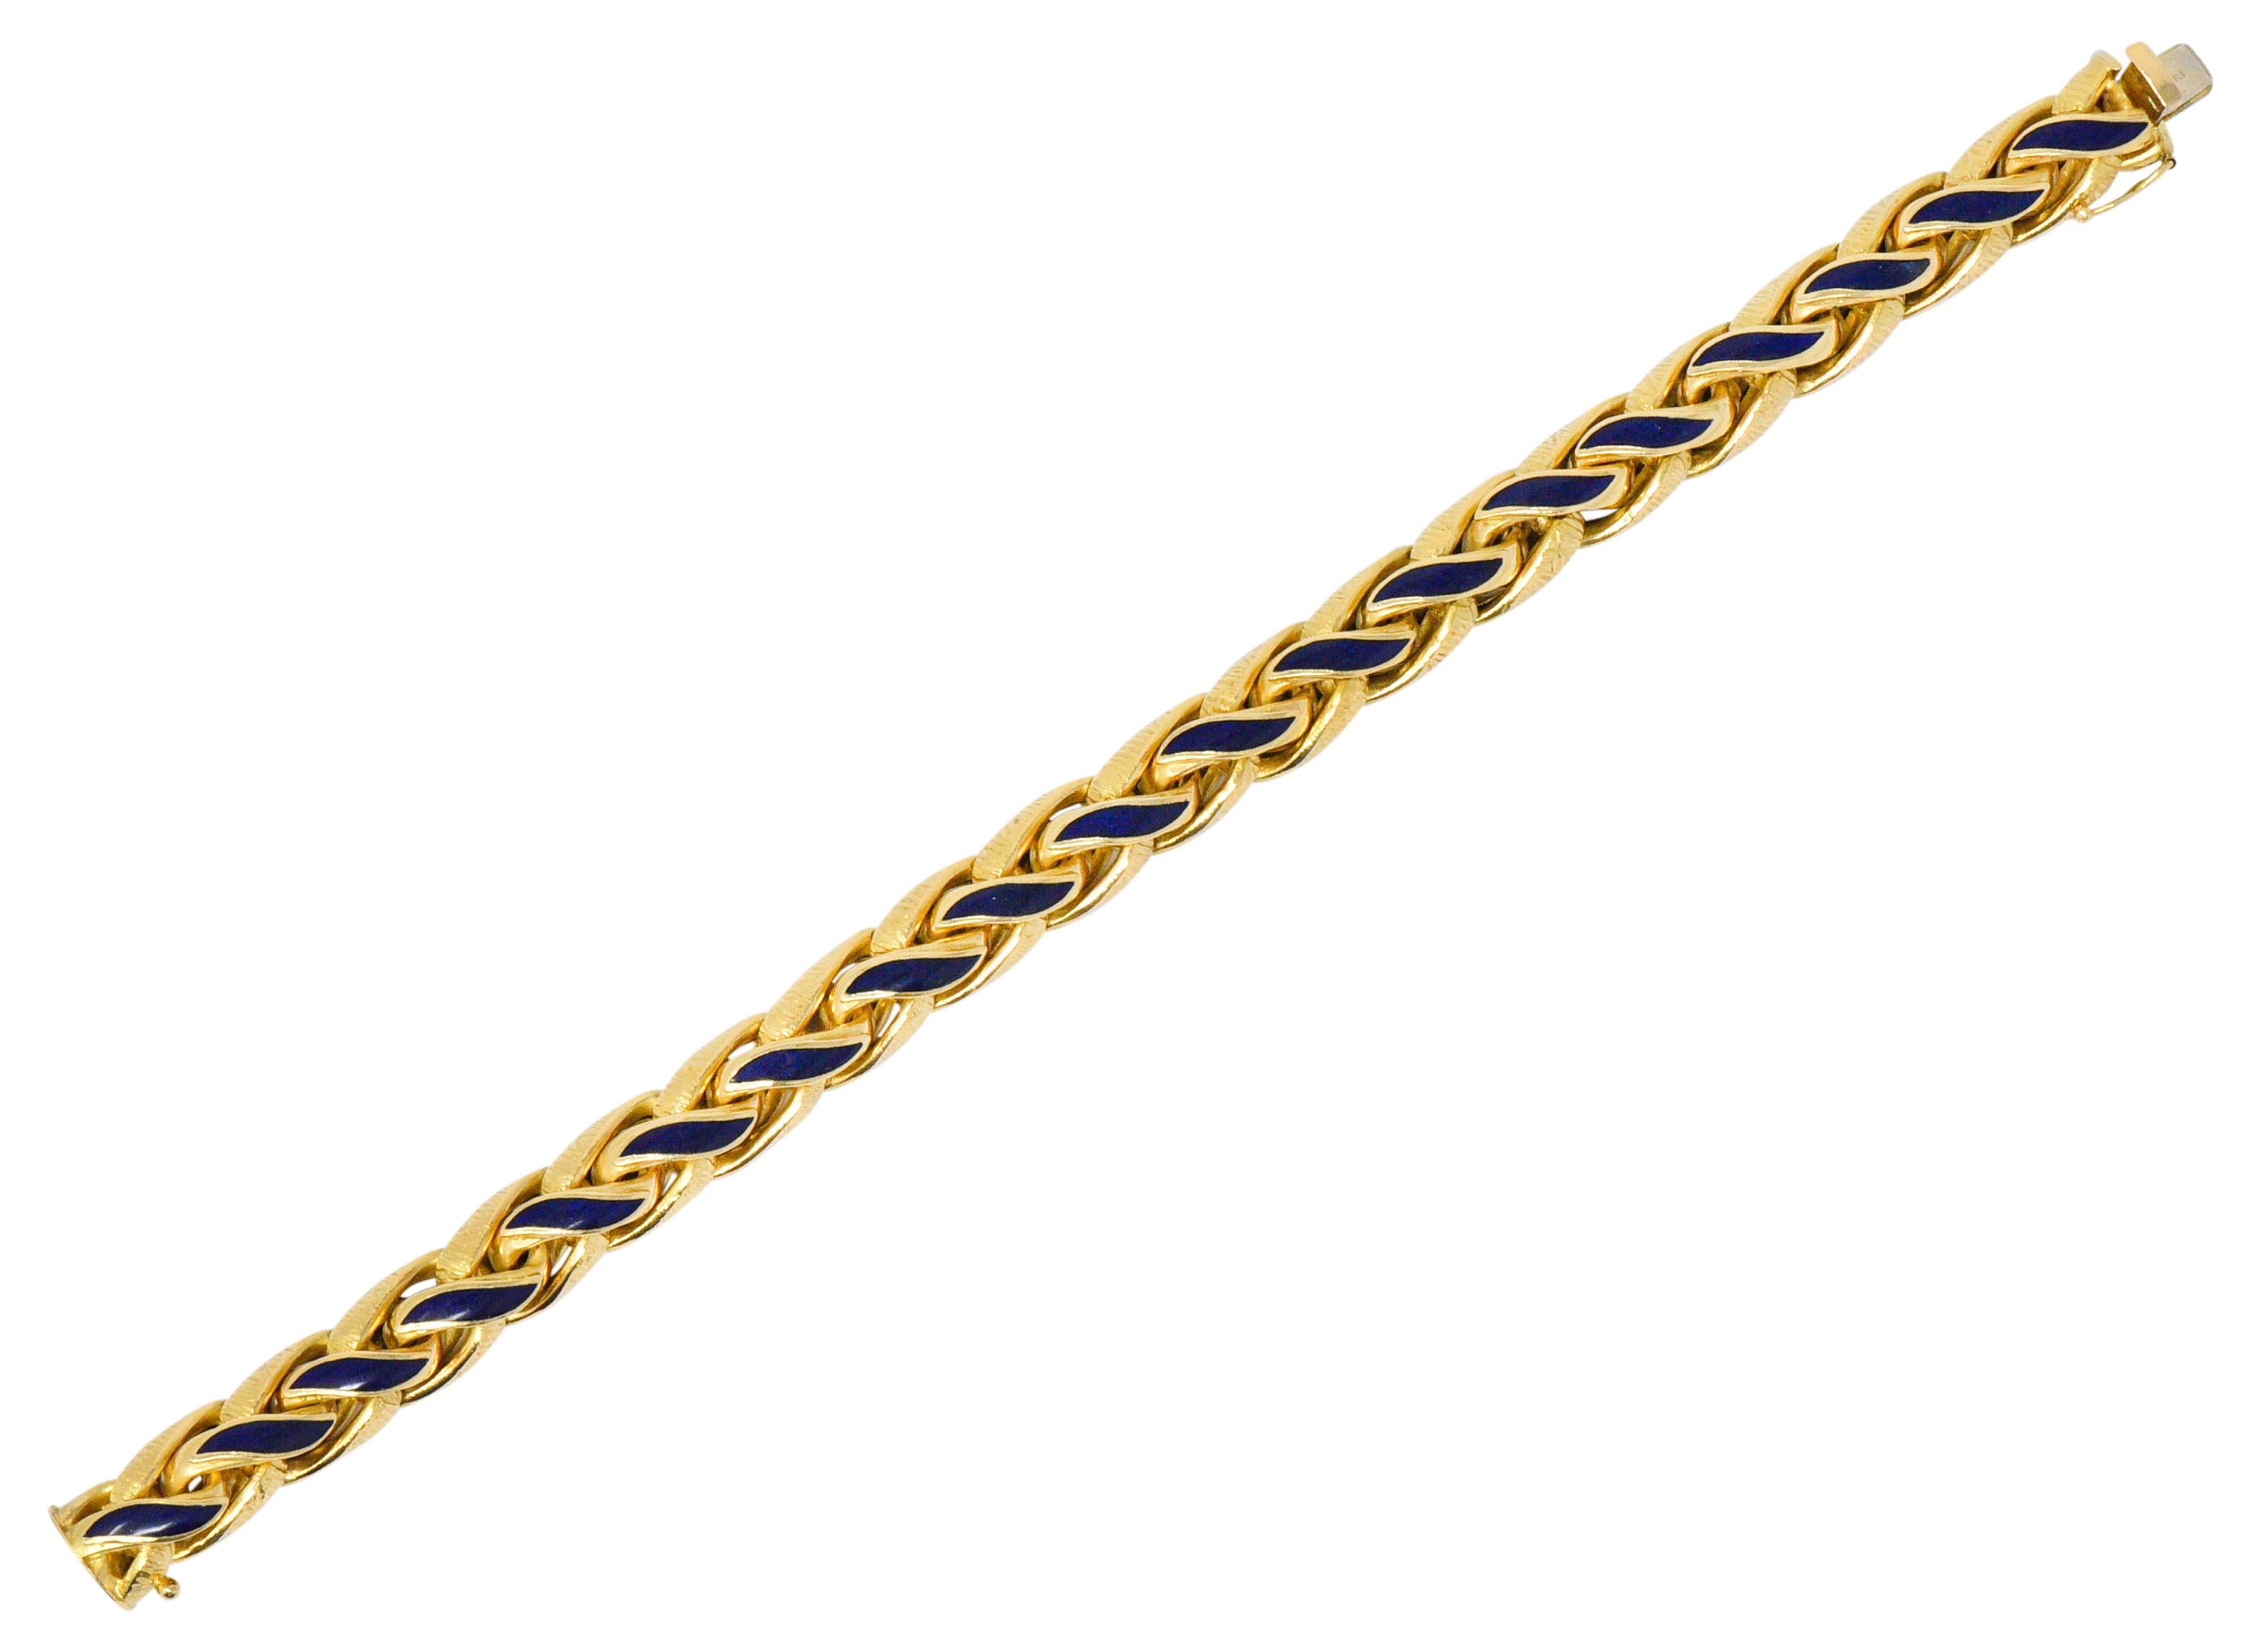 Braided wheat style bracelet centering ultramarine blue enamel detail

Accented by deeply engraved texture on profile facing links

Completed by concealed clasp and figure-eight safety

Maker's mark for Brevetto with partial Italian assay